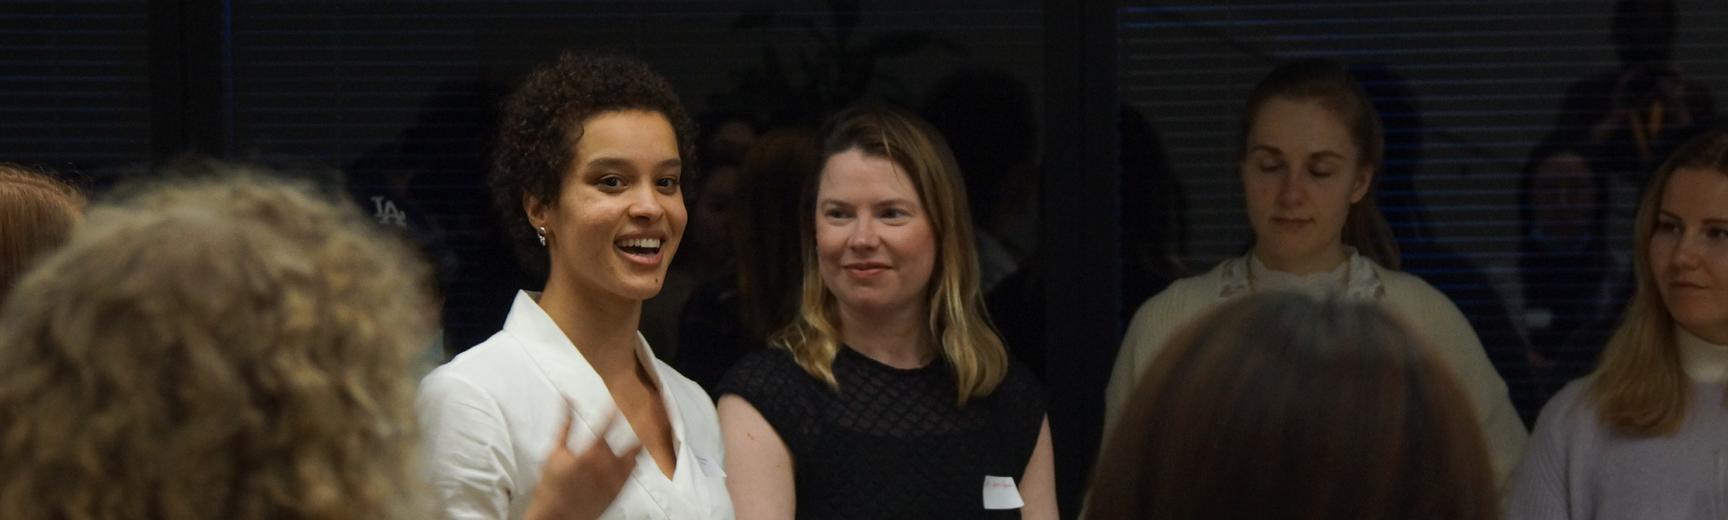 Female economists at a drinks reception